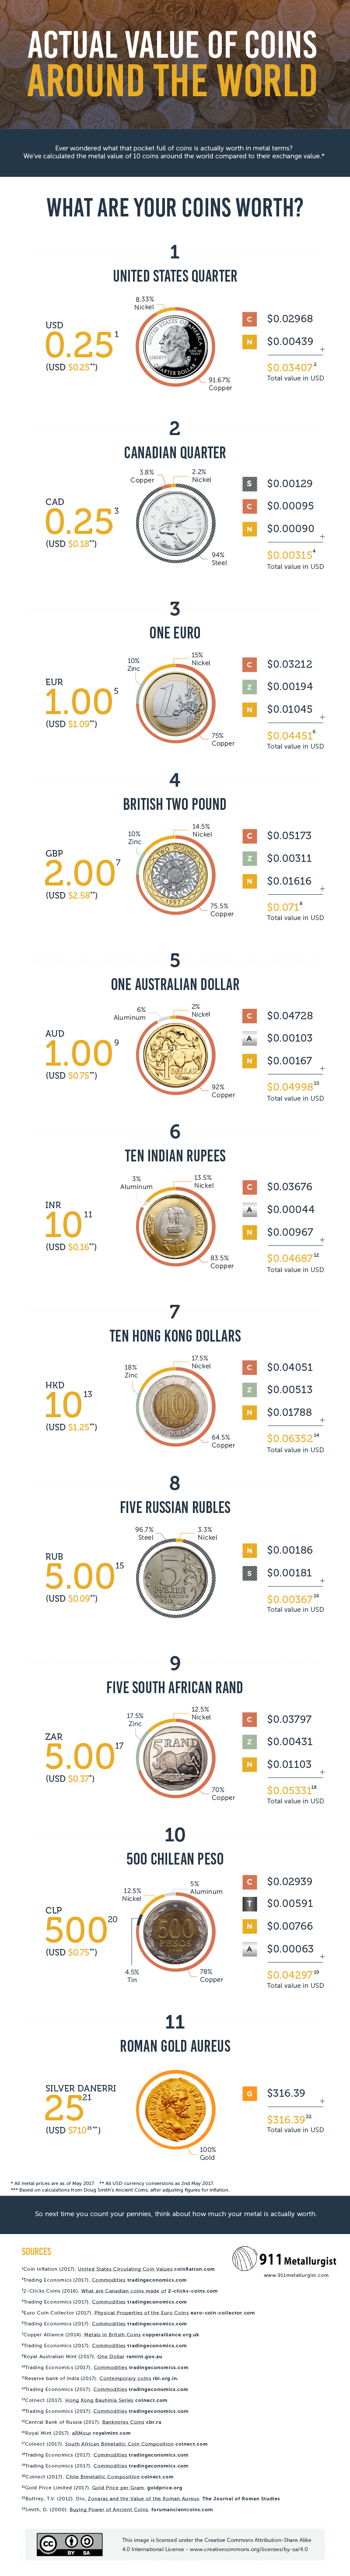 design-actual value of coins around the world